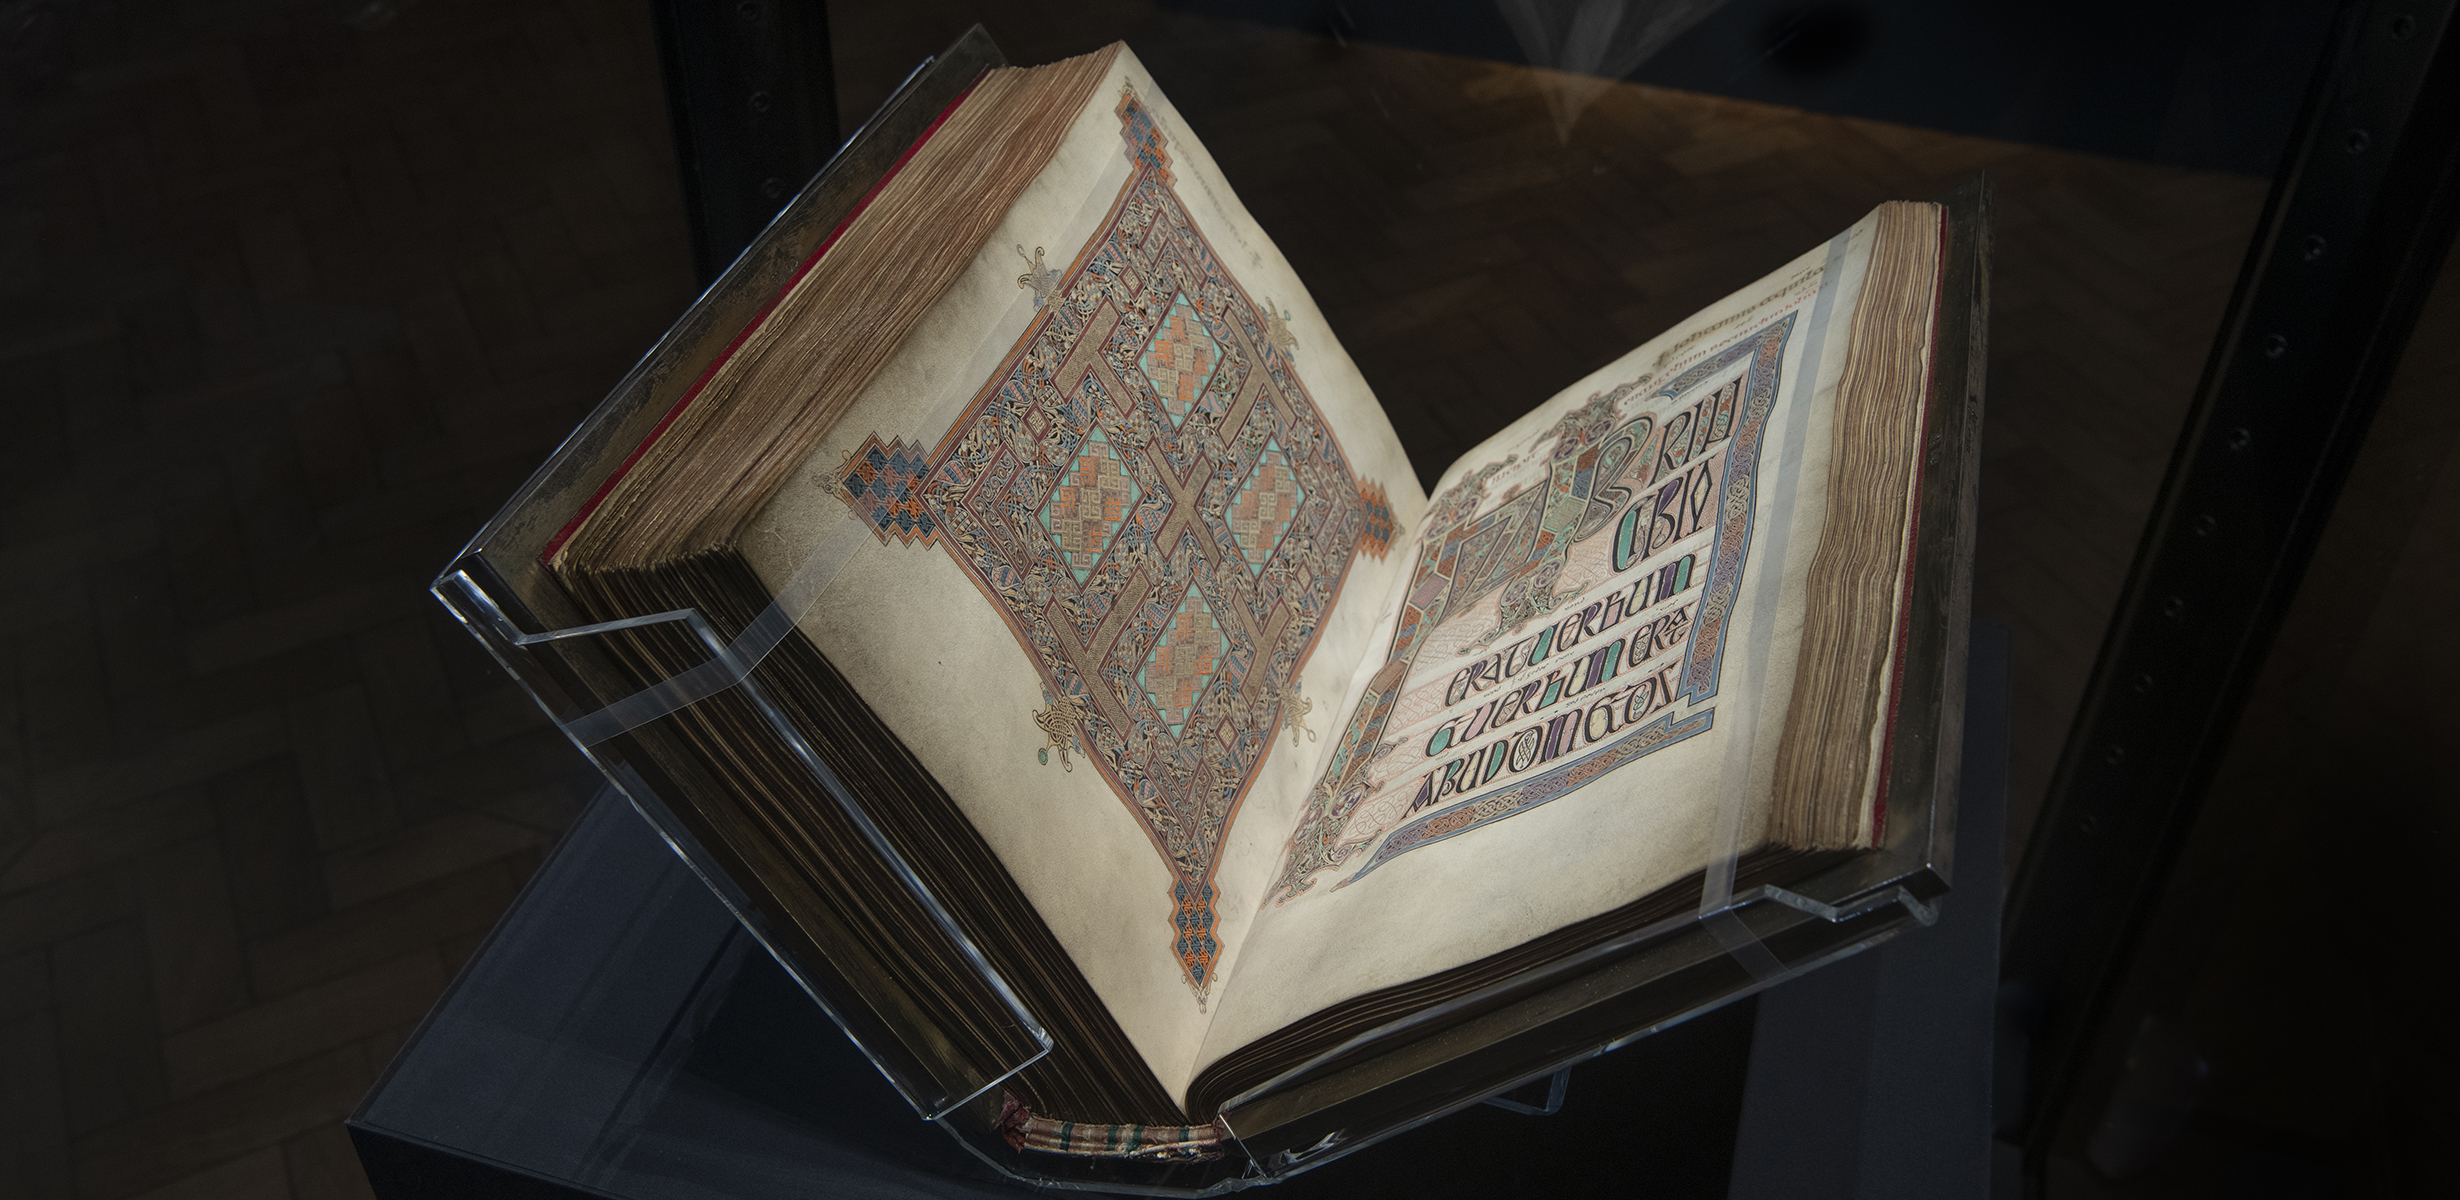 The Distant Aura of the Lindisfarne Gospels